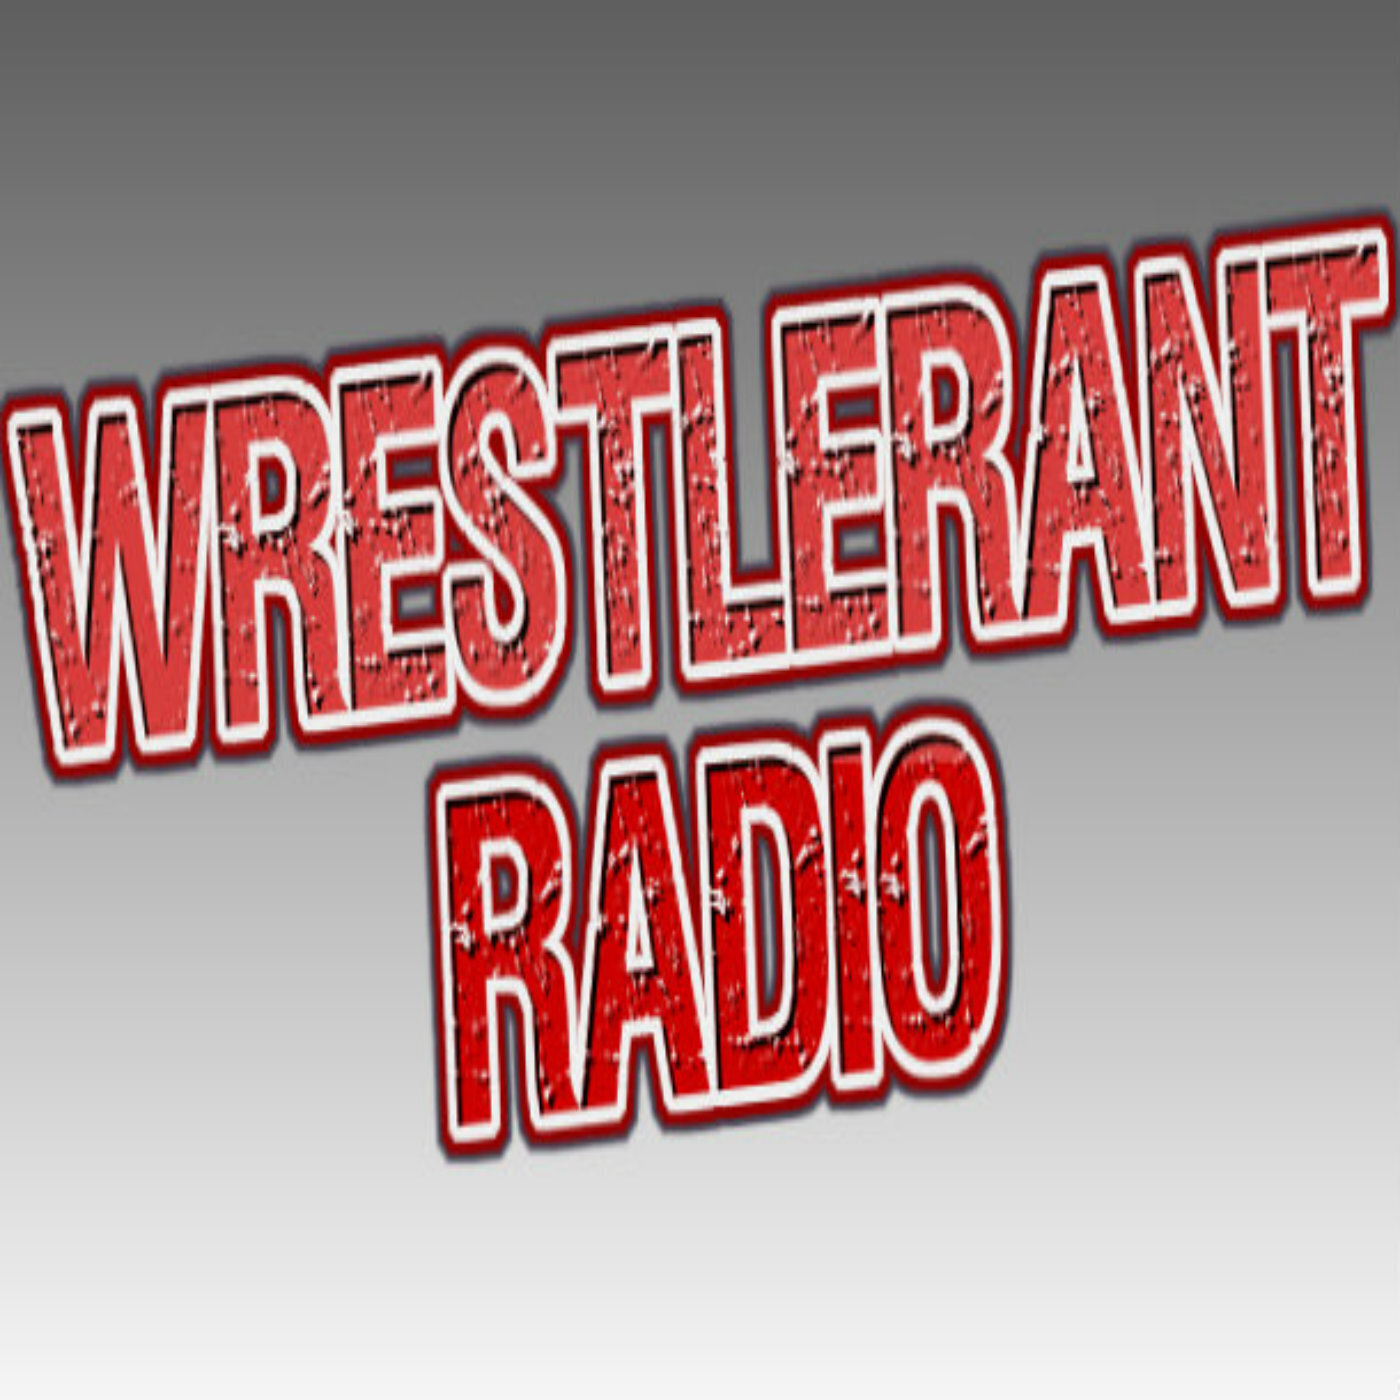 WrestleRant Radio - February 16, 2016: Wade Barrett and Brie Bella Give Their Notice to WWE